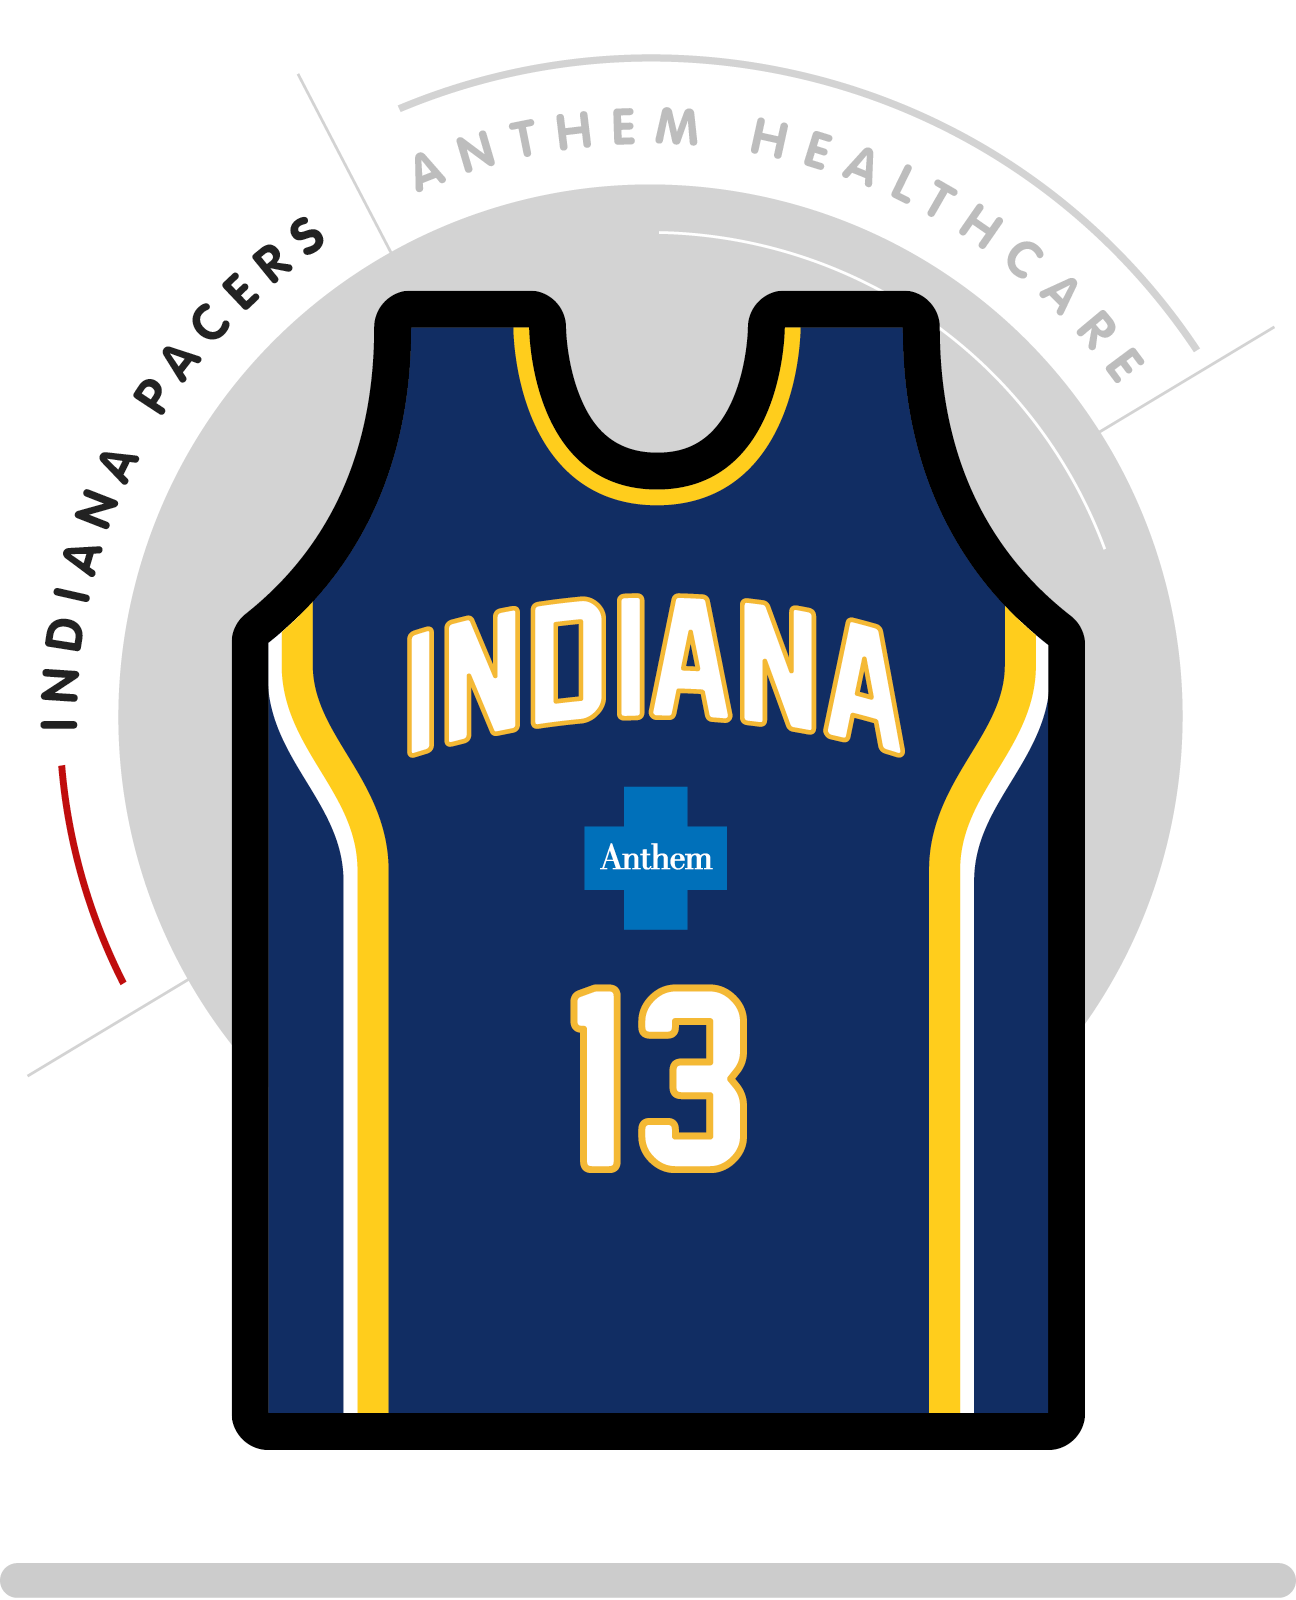 NBA Jerseys Re-Imagined with Corporate Logos